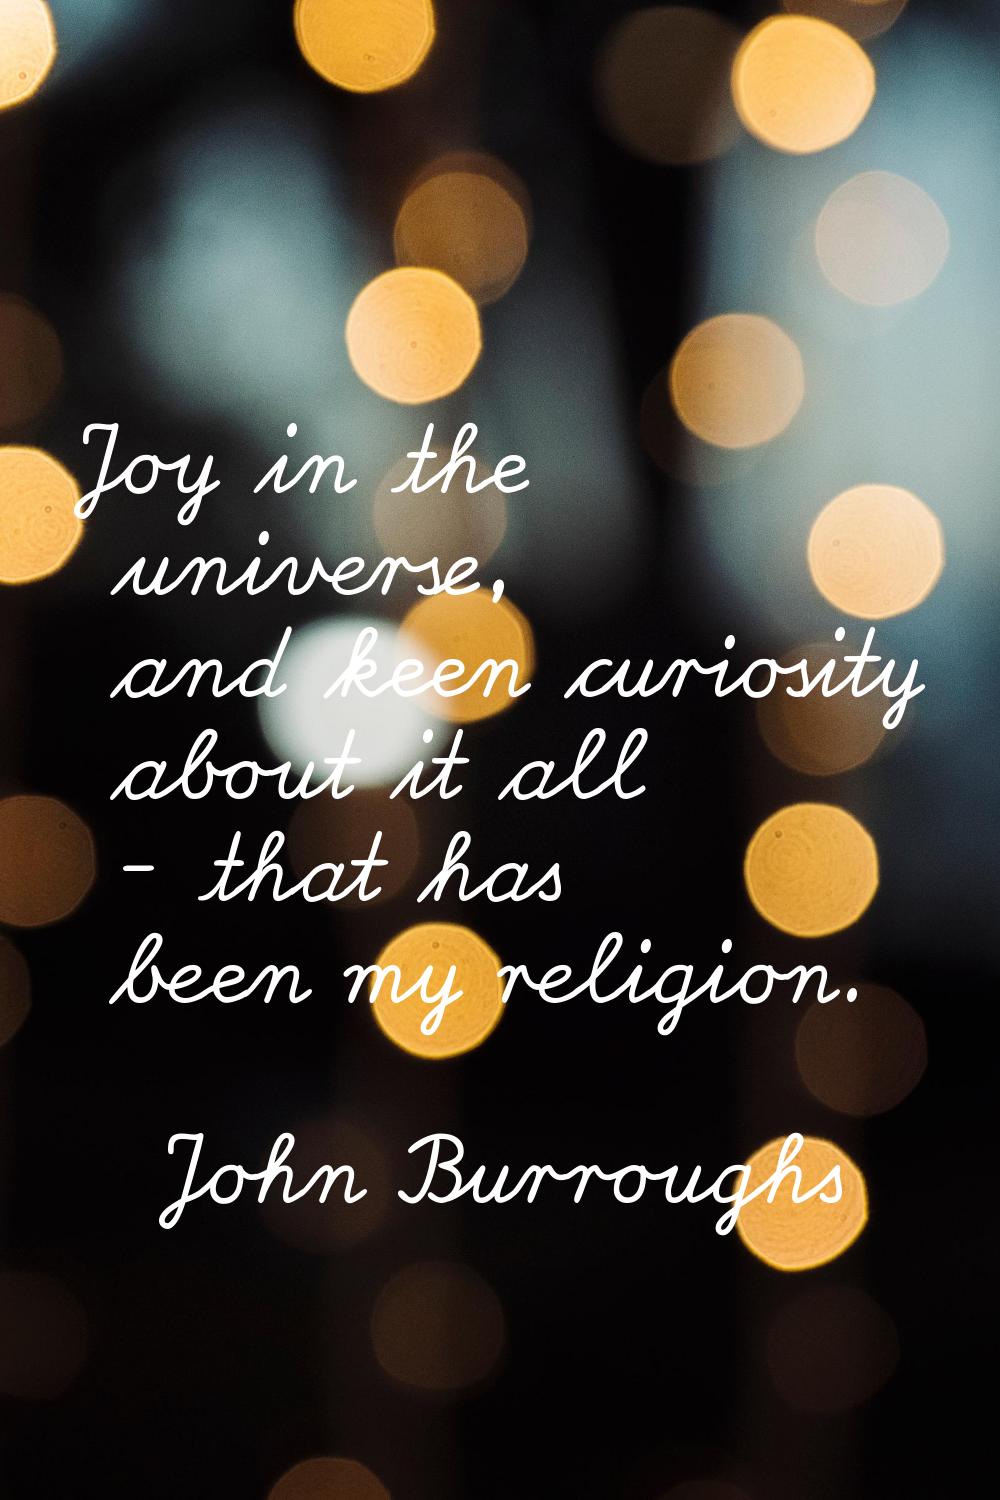 Joy in the universe, and keen curiosity about it all - that has been my religion.